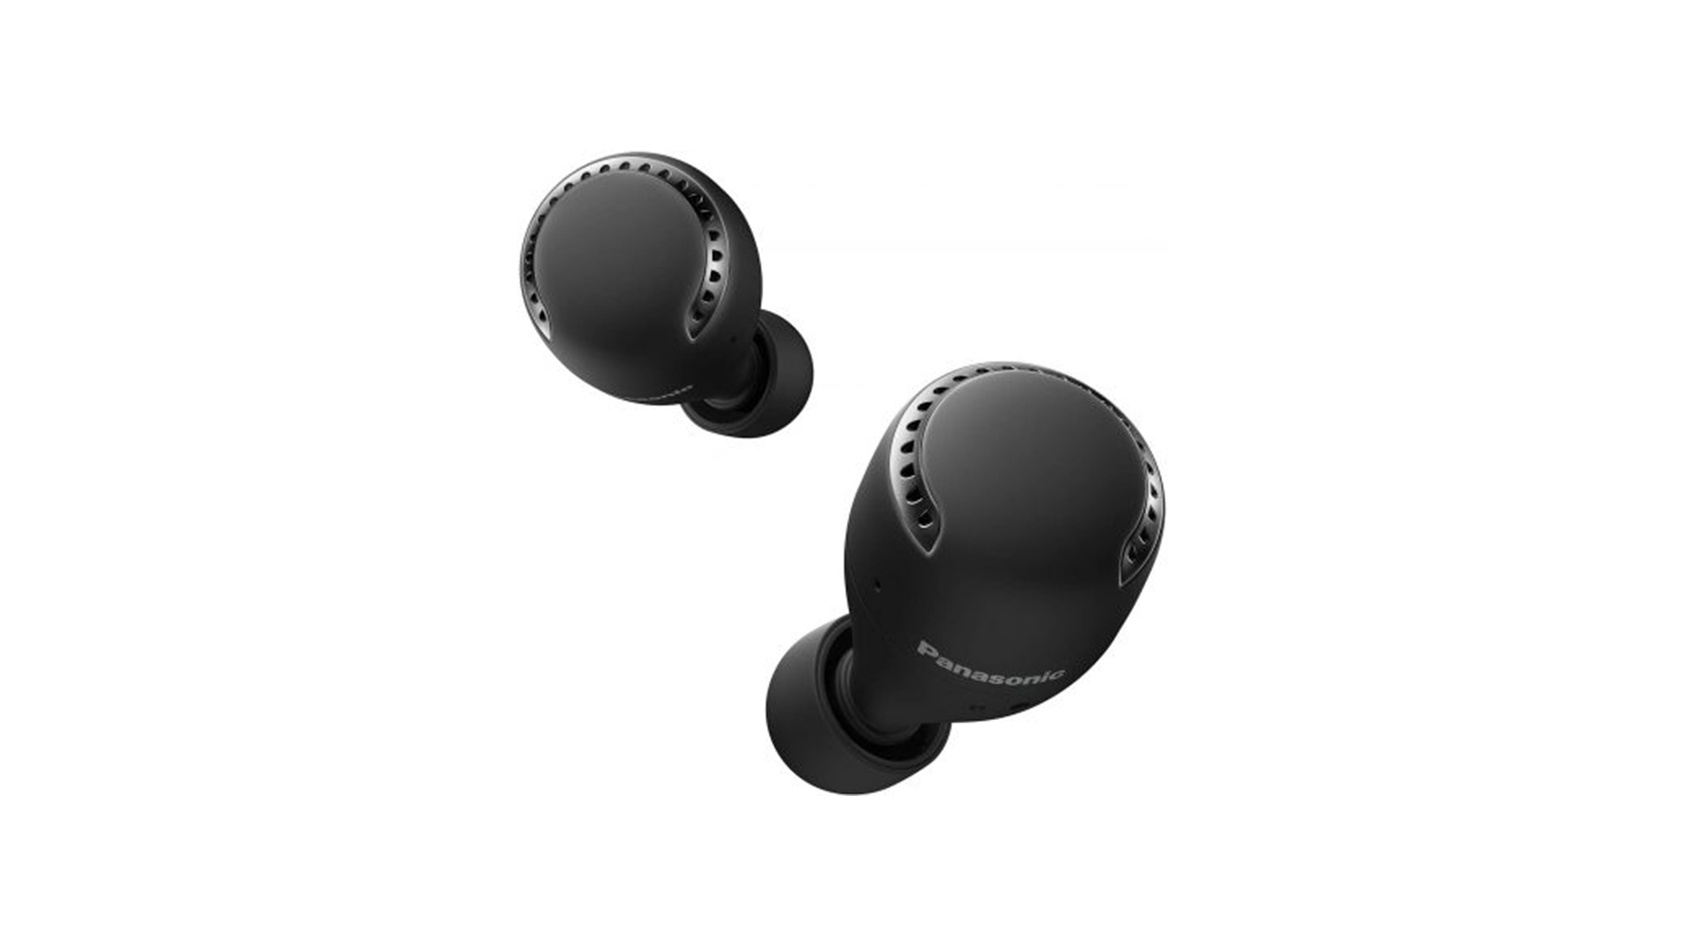 A picture of the Panasonic RZ-S500W noise canceling earbuds against a white background.